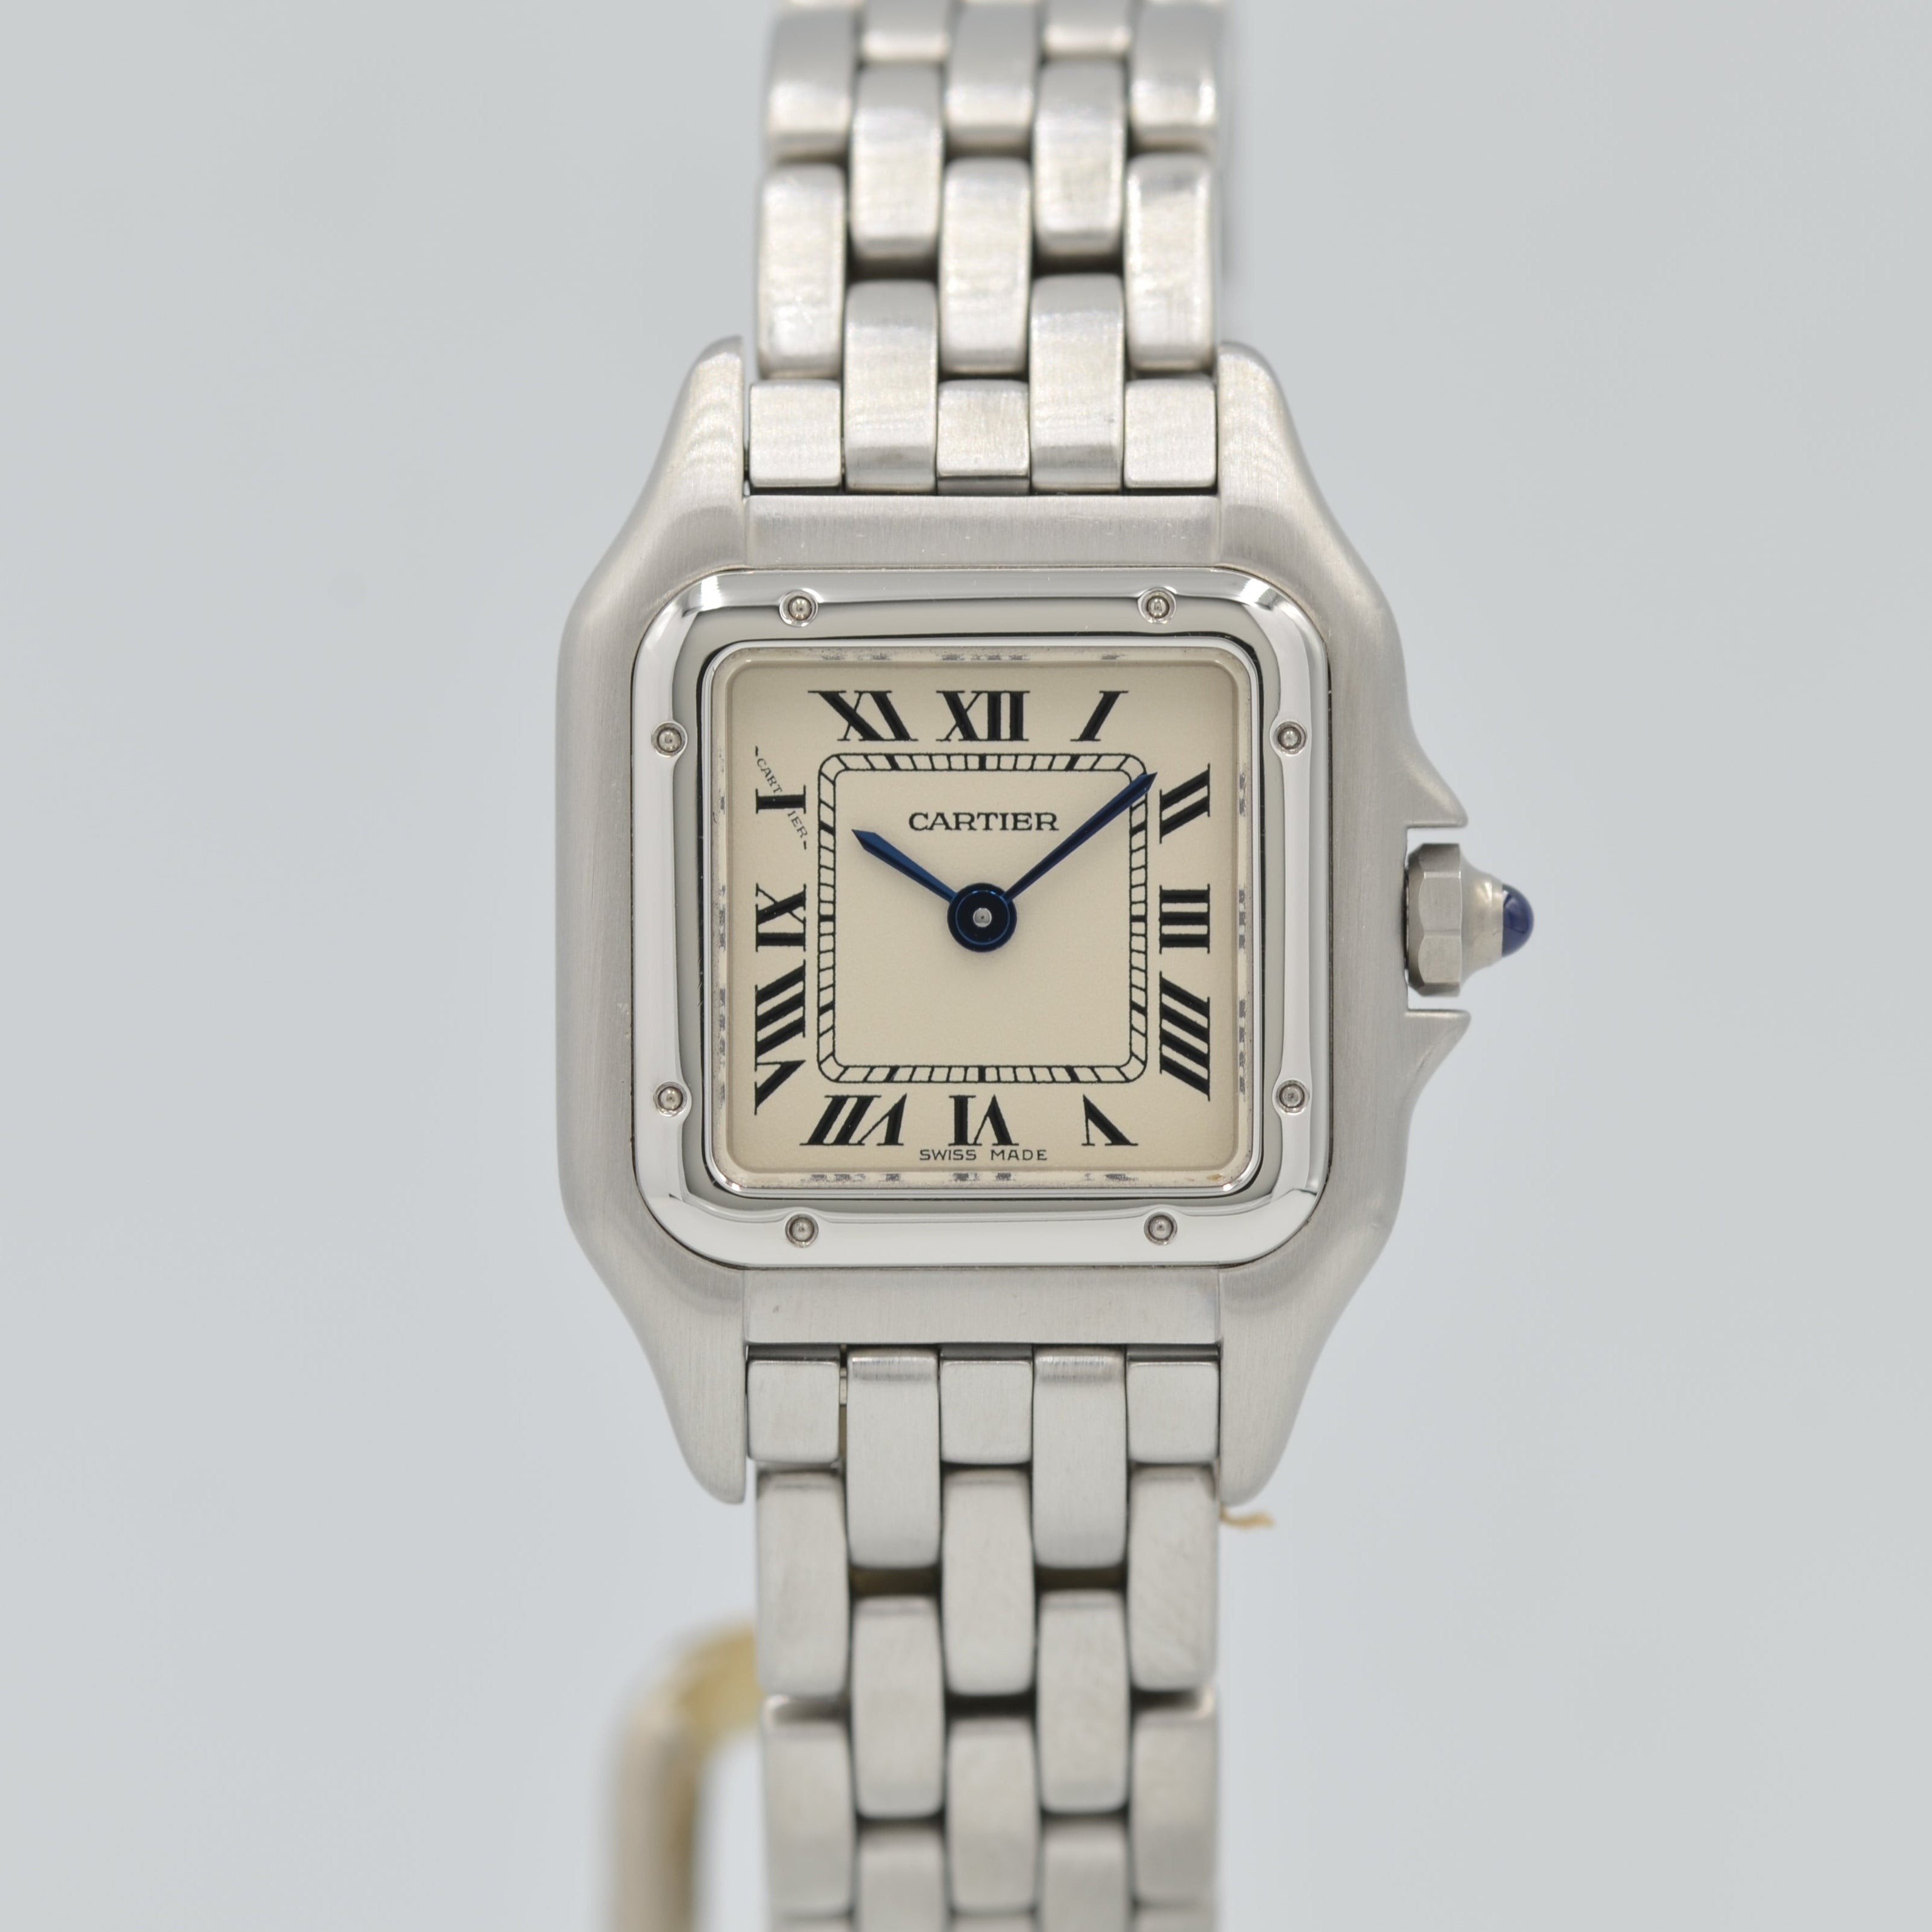 Cartier] Panthère SM stainless steel with original box – REGALO 